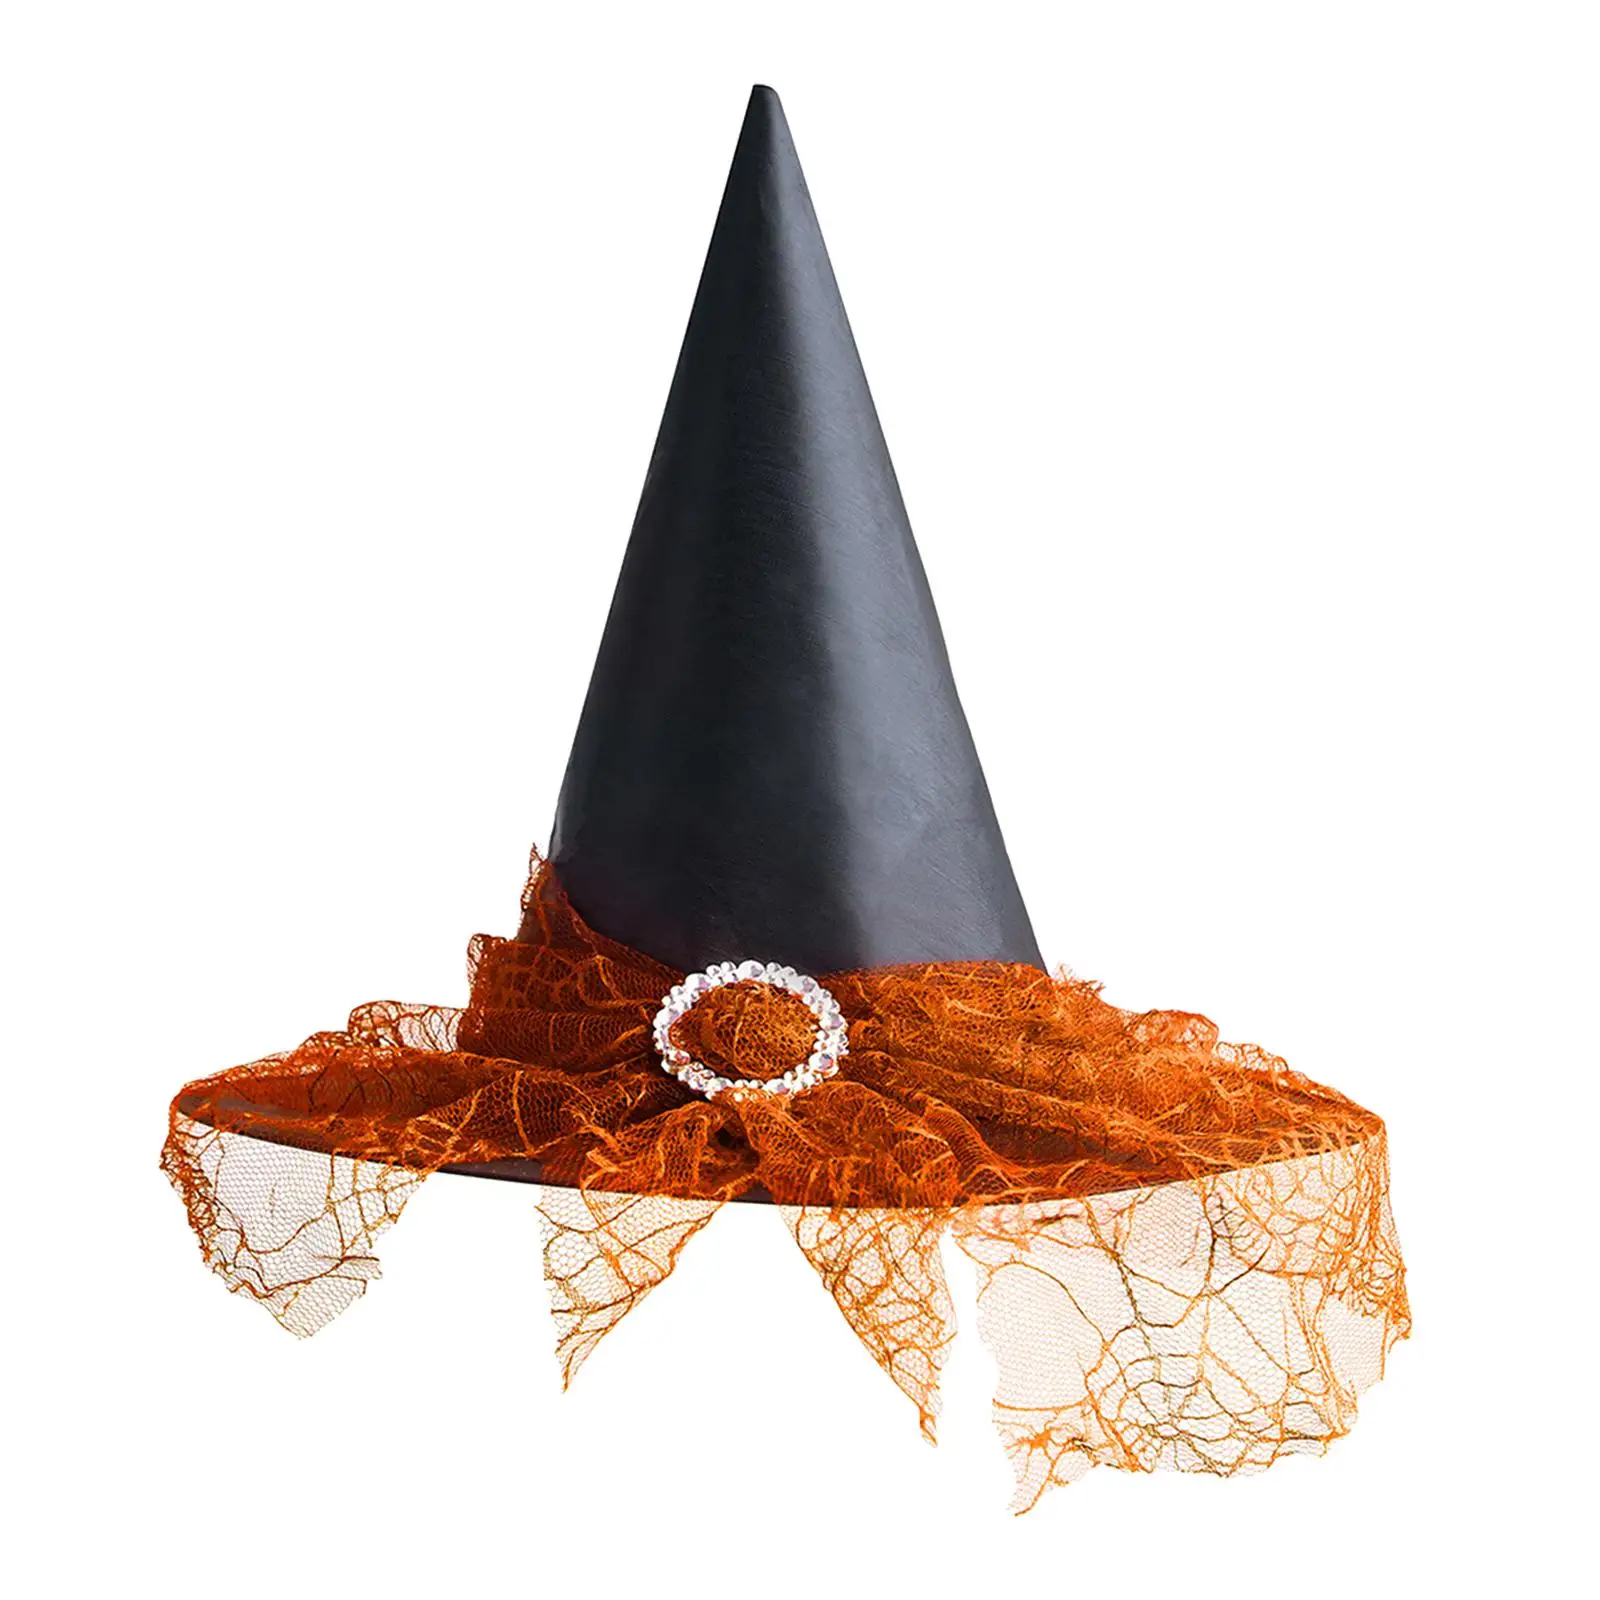 Halloween Witch Hat Wizard Costume Accessory Pointed Top Adult Hat for Halloween Party Masquerade Carnivals Fancy Dress Cosplay